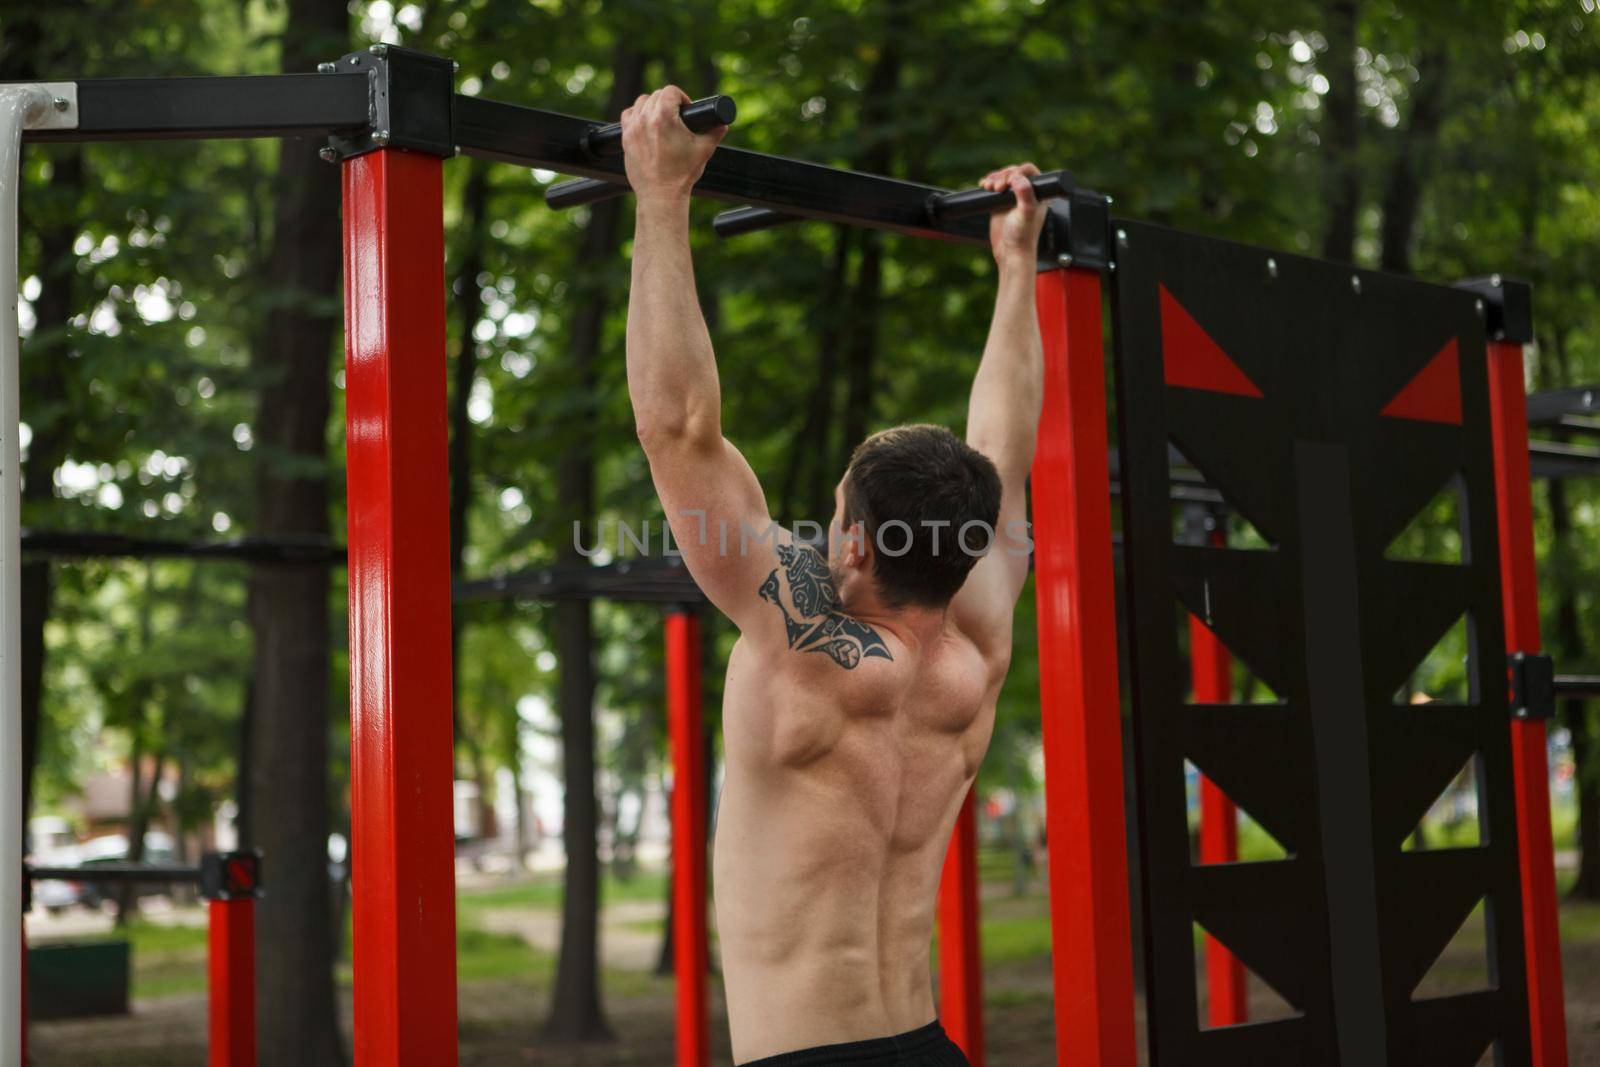 Rear view shot of a ripped muscular man doing pull ups outdoors